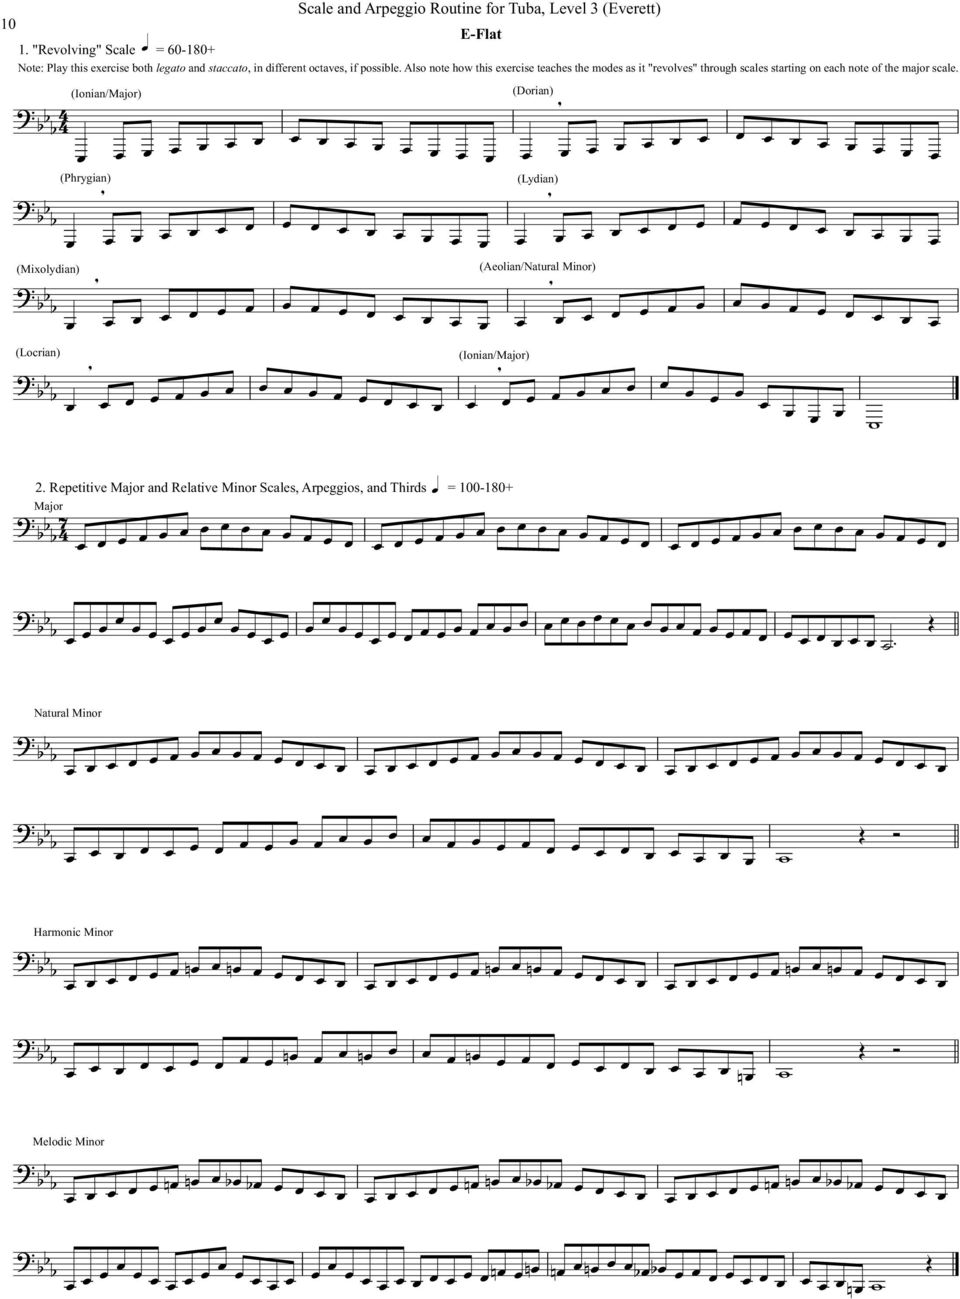 Also note ho this exercise teaches the modes as it "revolves" through scales starting on each note of the major scale.